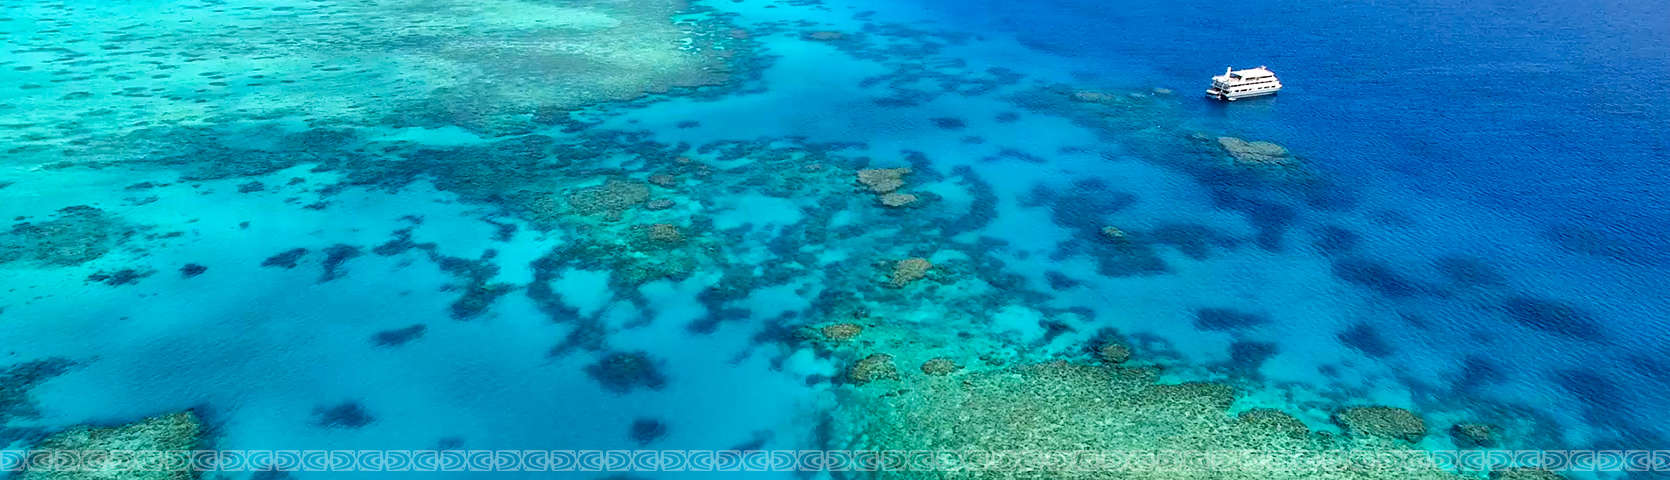 Great Barrier Reef Expedition Cruise